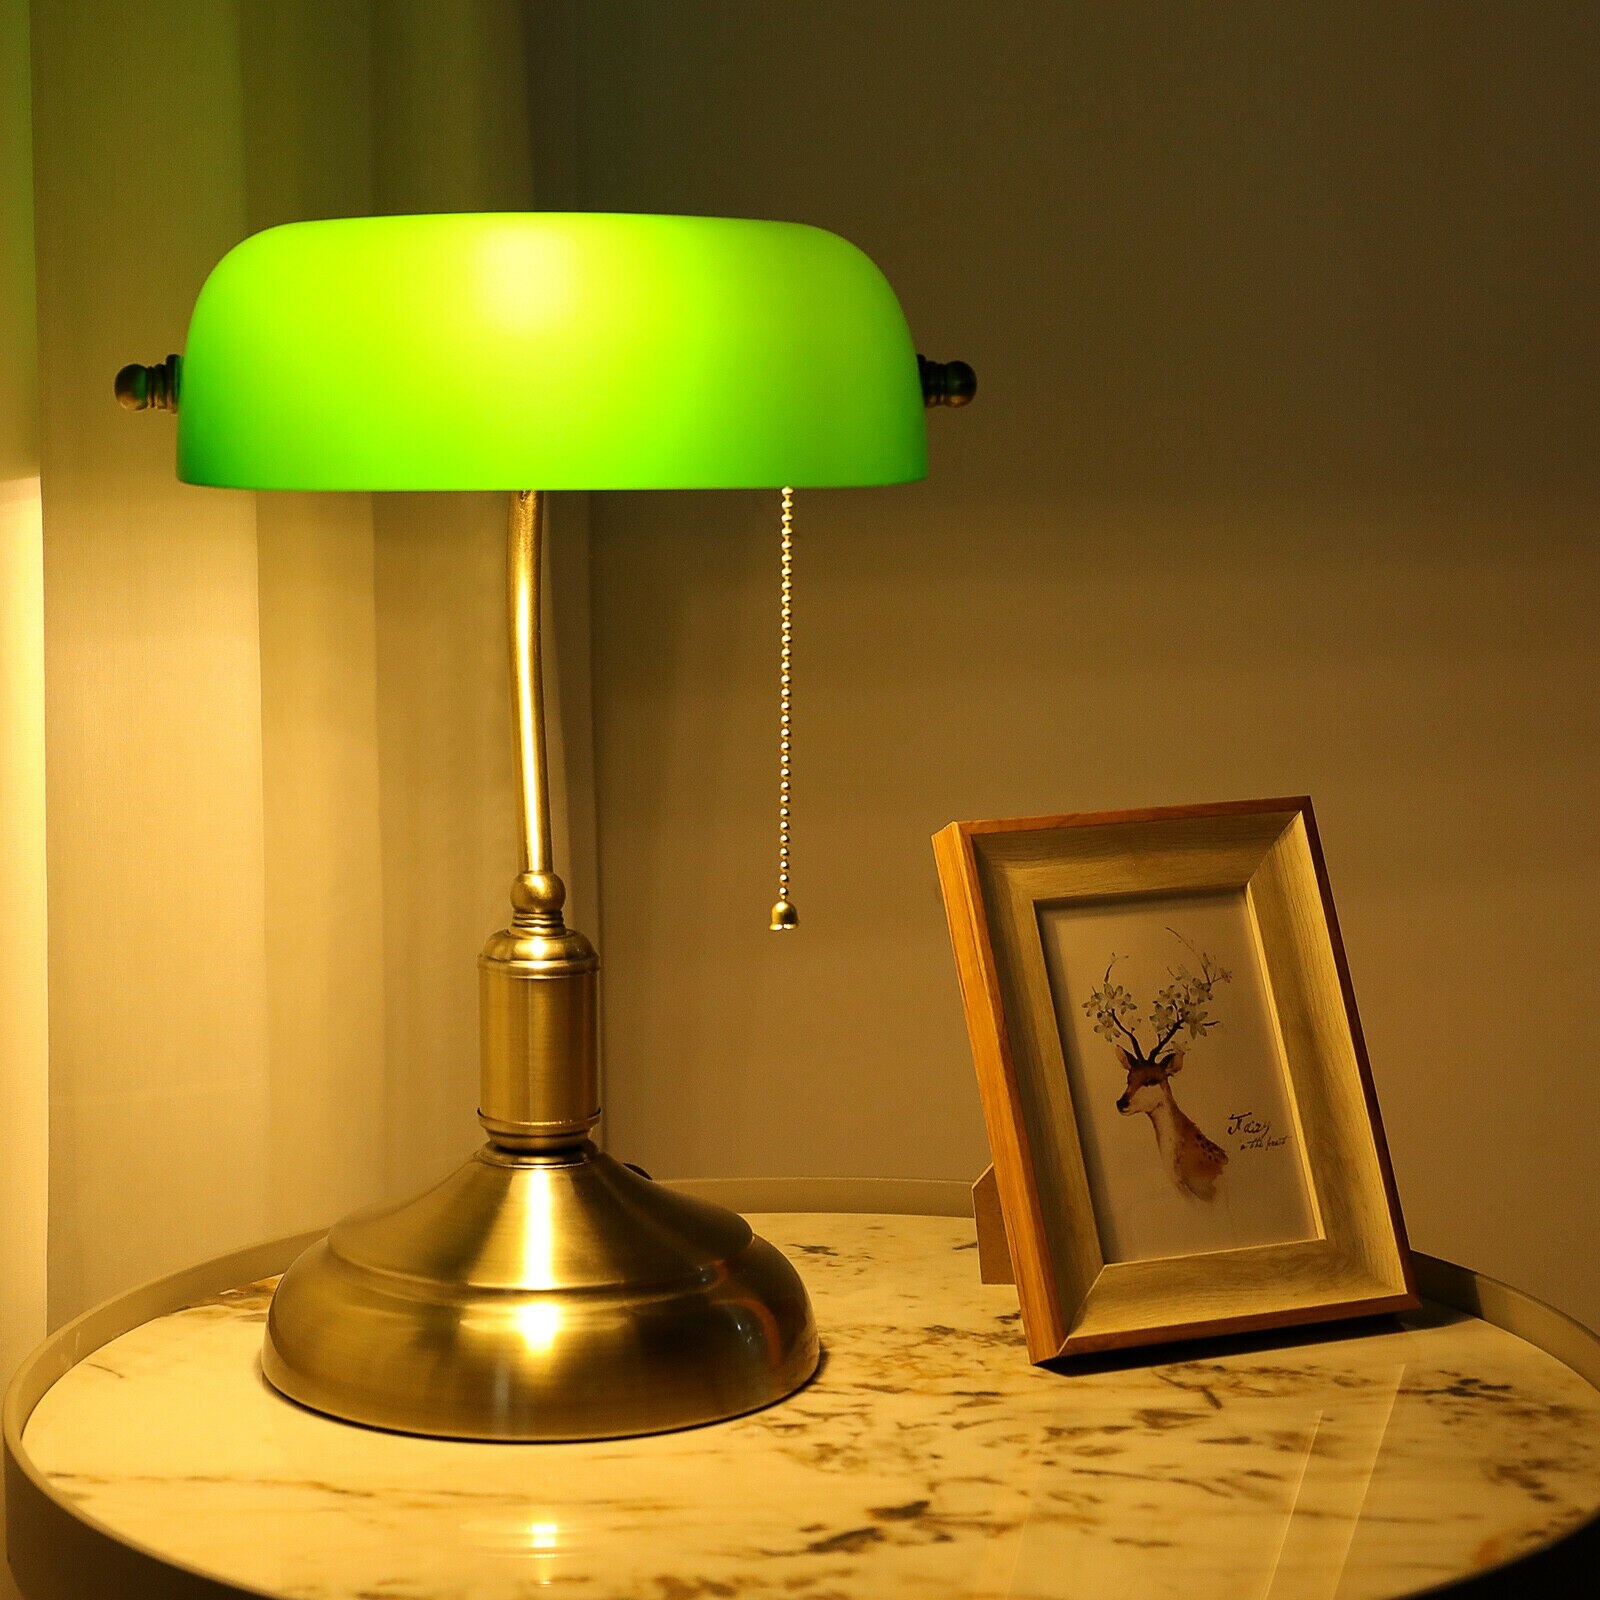 Antique Green Glass Bankers Desk Lamp Table Light w/ Pull Chain Switch -  9x7x15